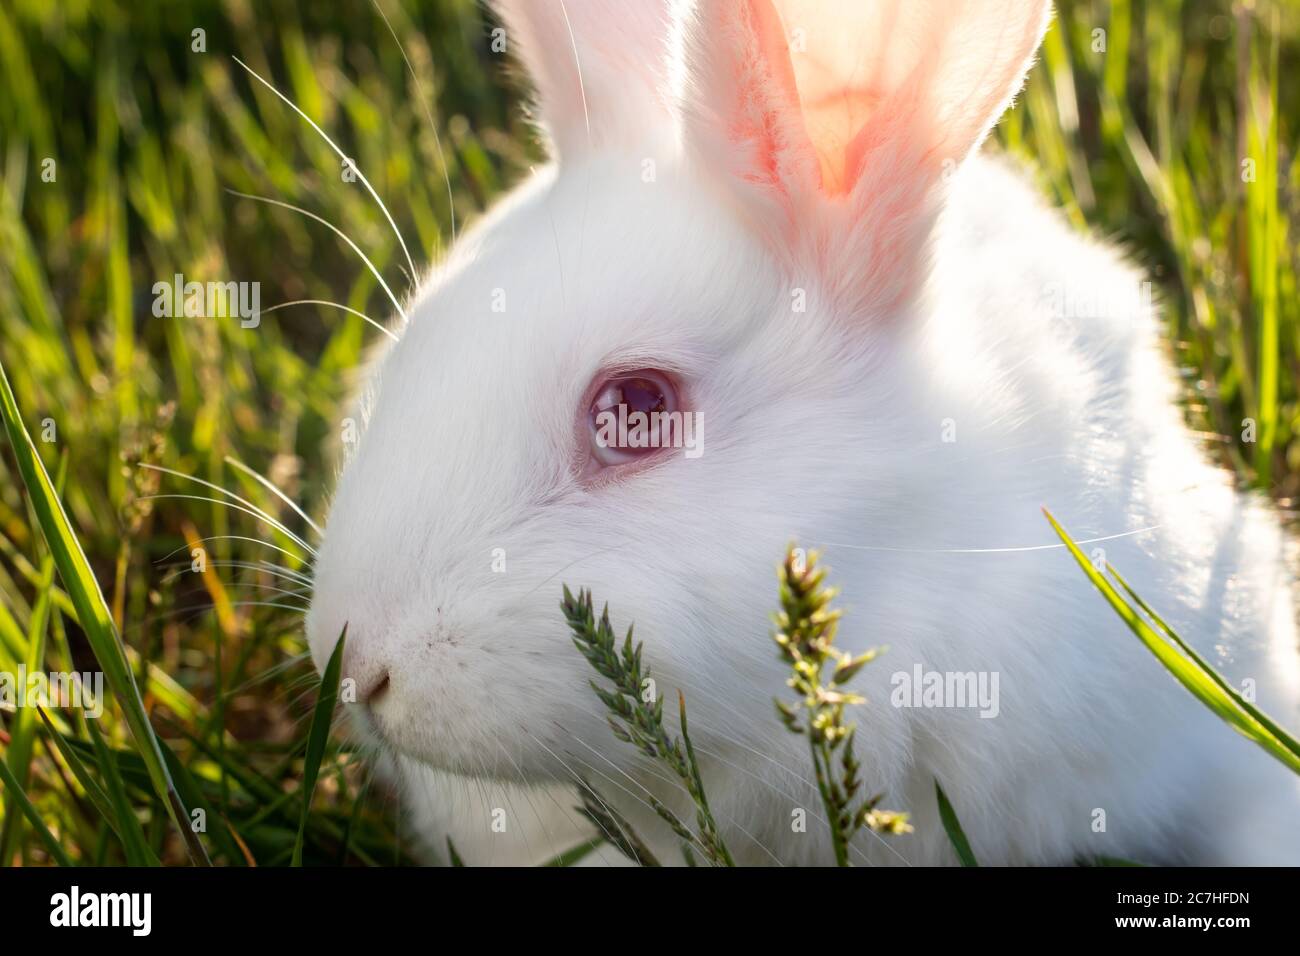 The Pannon White rabbit sits on the green grass. Meat large broiler bunny. Stock Photo